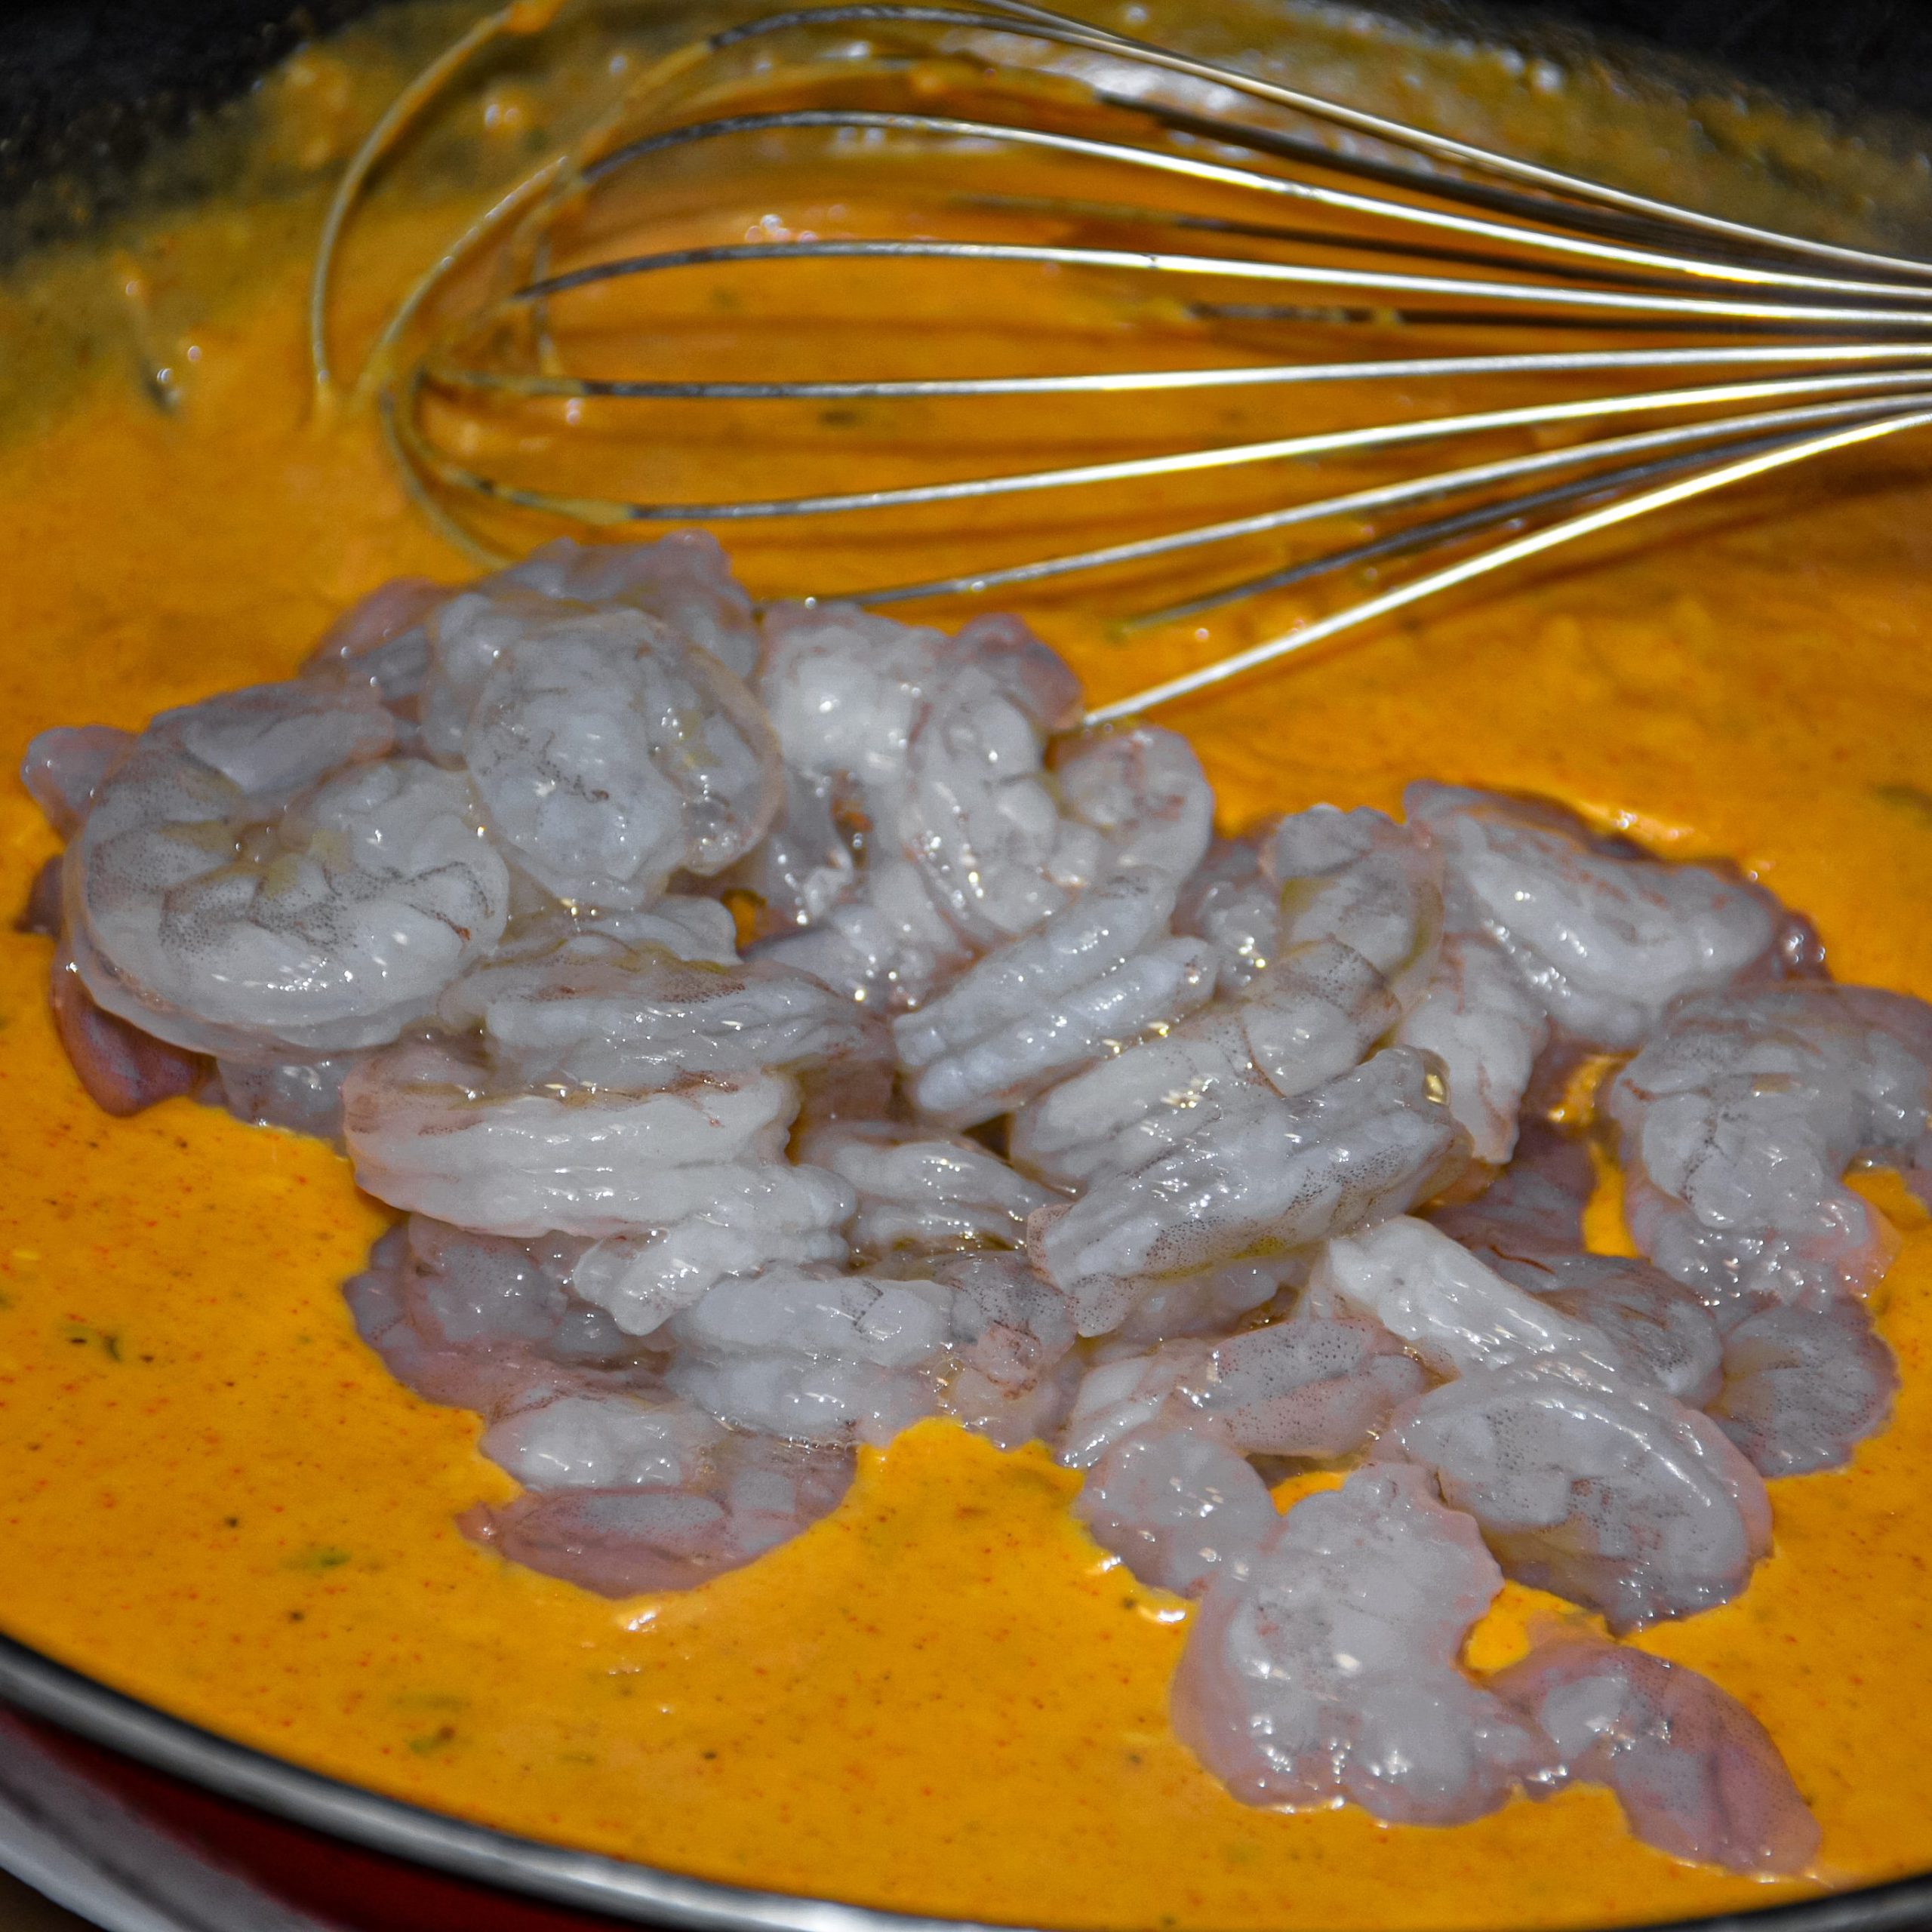 Add your shrimp, and cook until fully heated, the shrimp will turn to beige color and no longer translucent.